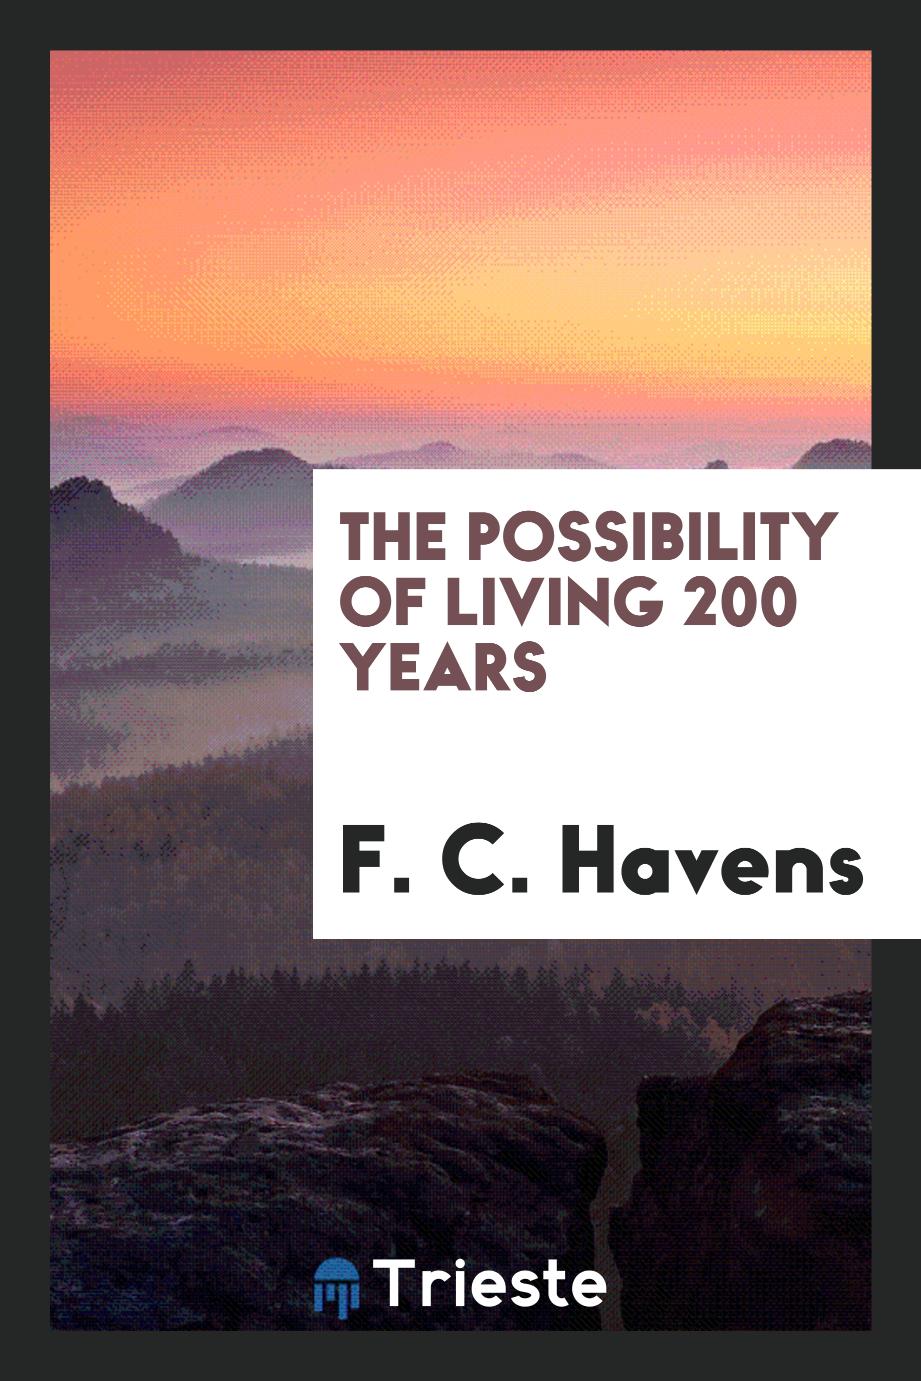 The possibility of living 200 years